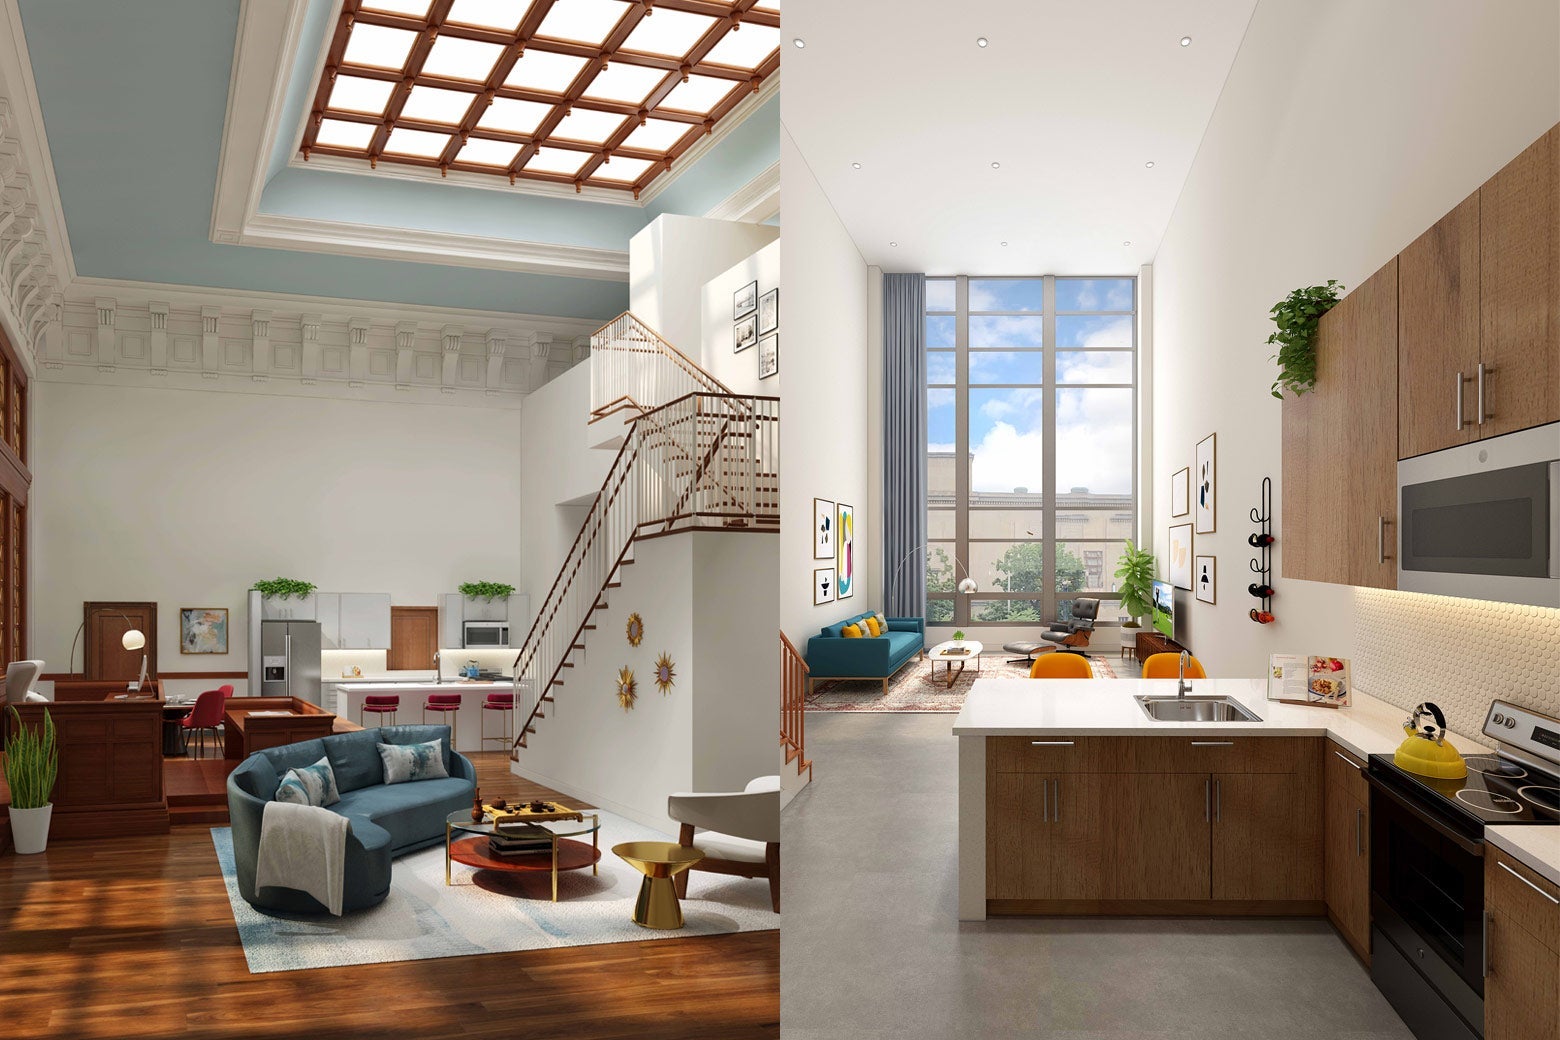 Two airy interiors of new apartments. On the left, a dramatic staircase leading to a large, gridded skylight. On the right, a kitchen and living room.